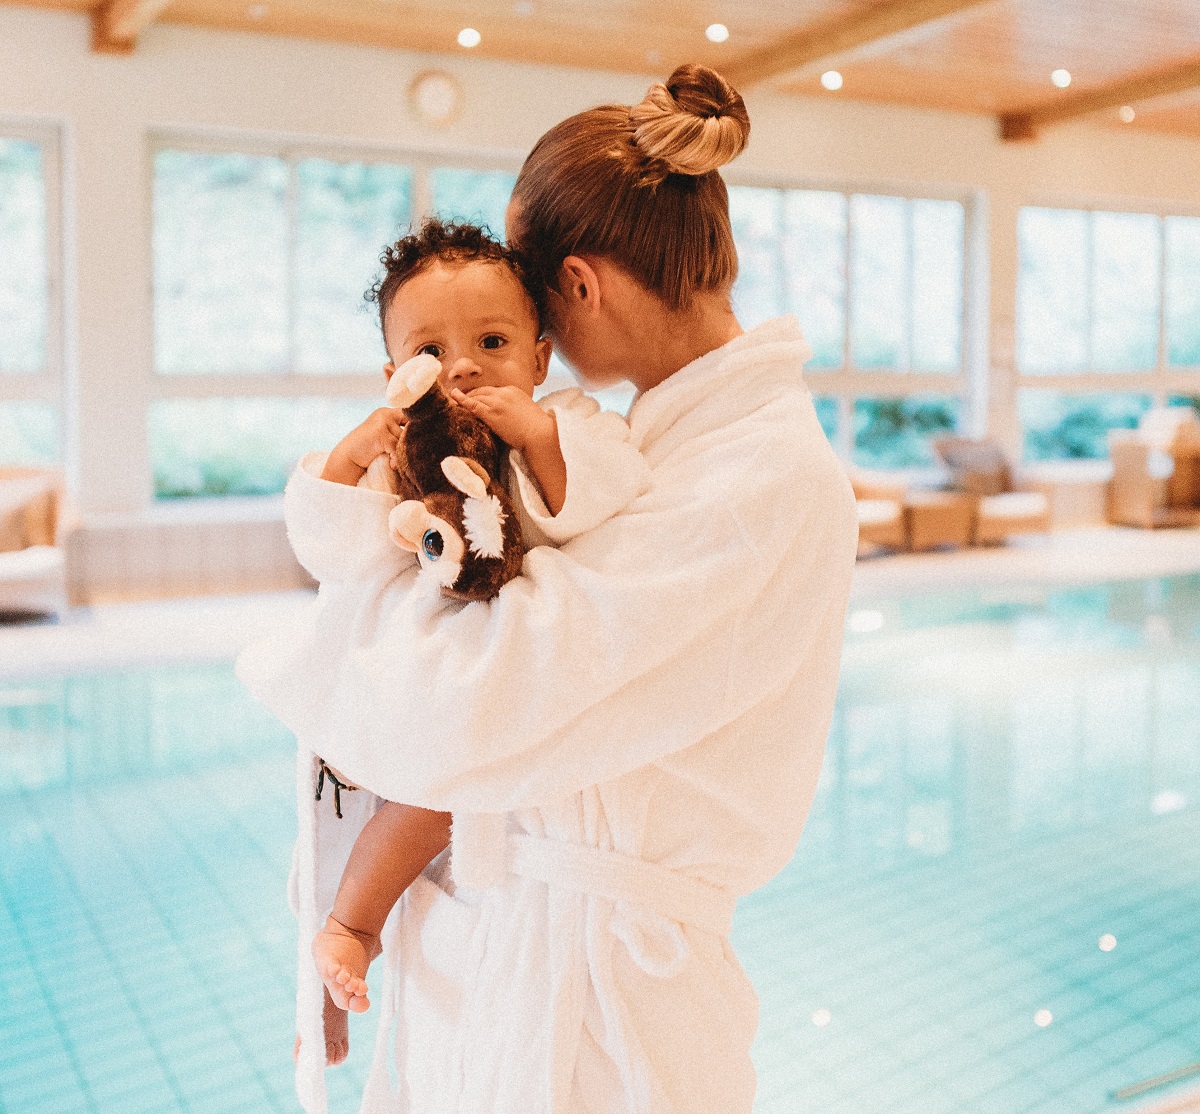 Woman in spa with baby